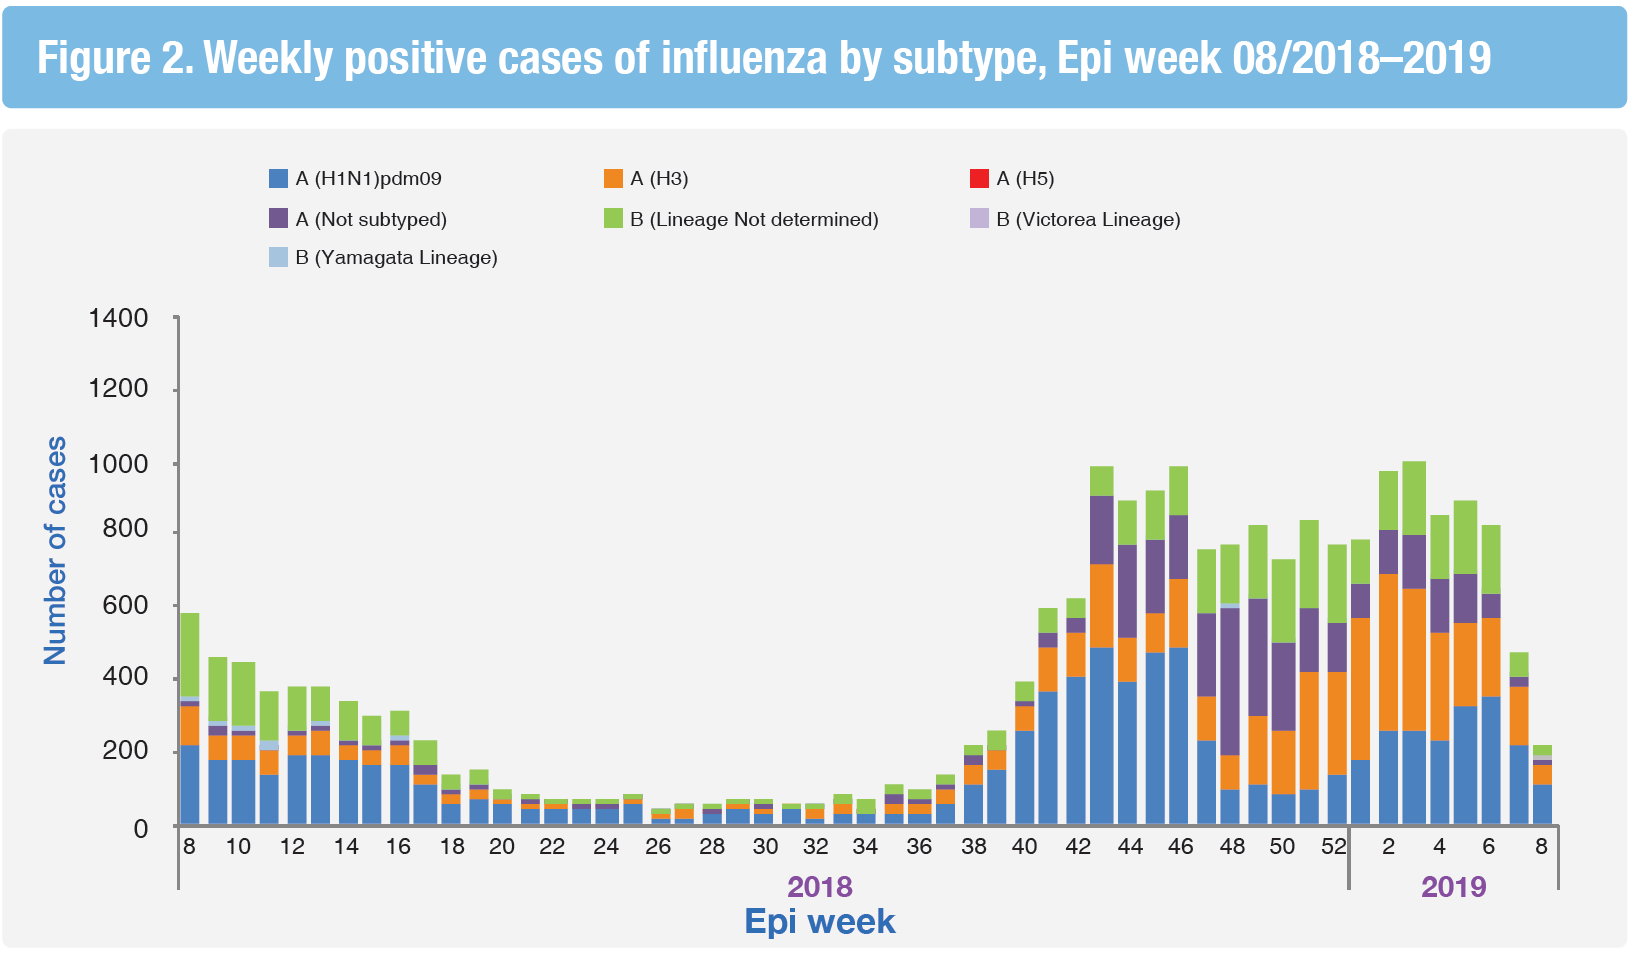 Weekly distribution of influenza subtypes